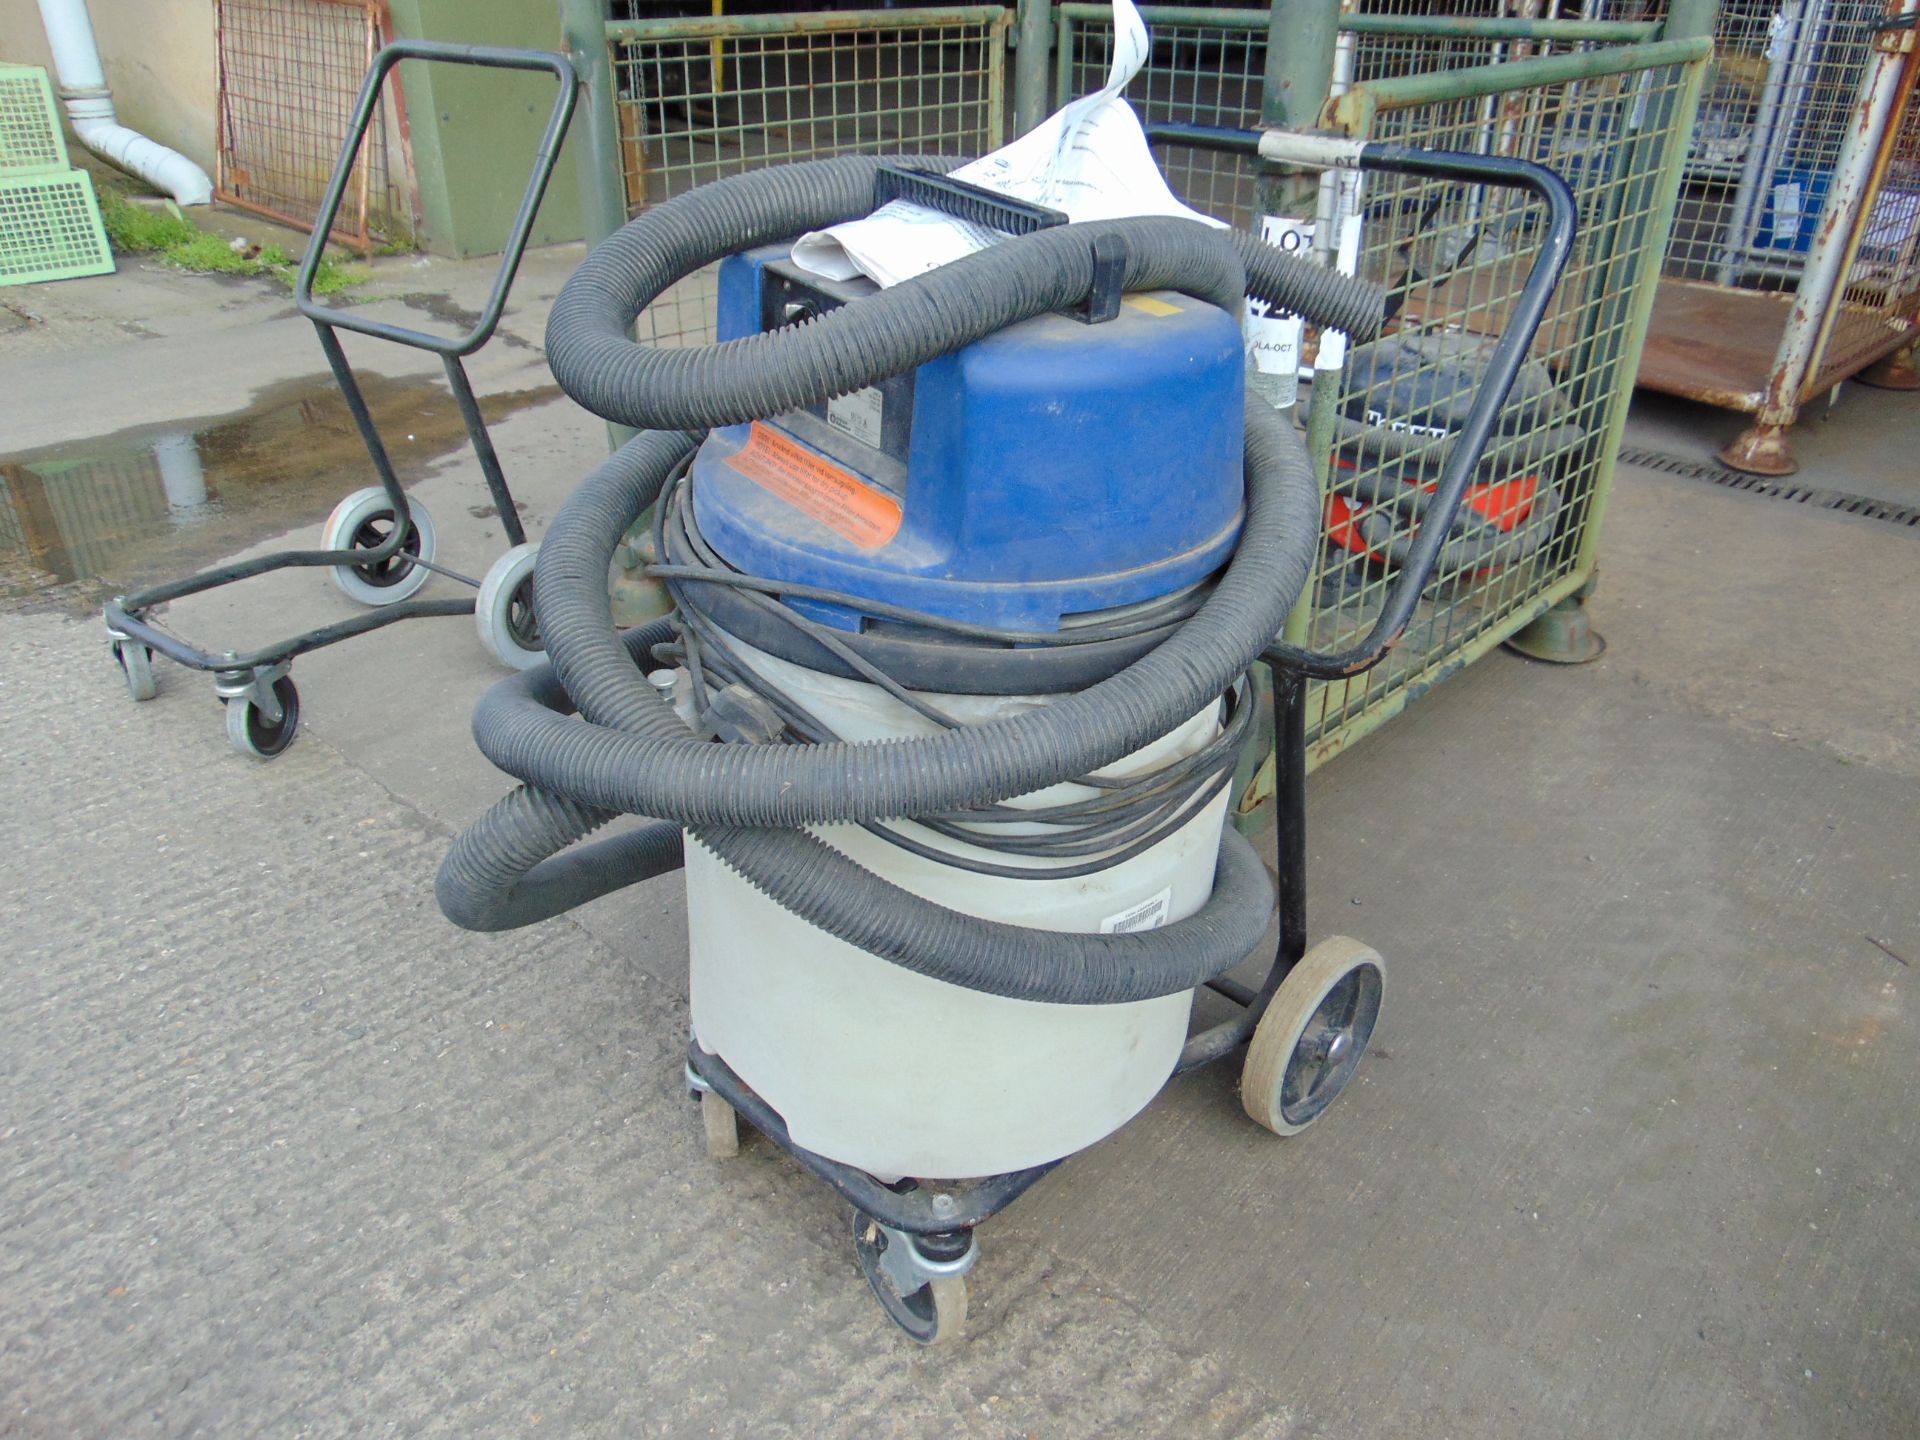 1 x Euroclean Shop Vacuum & Henry Vacuum w/ Trolley, Piping, Various Attachments etc. - Image 2 of 11